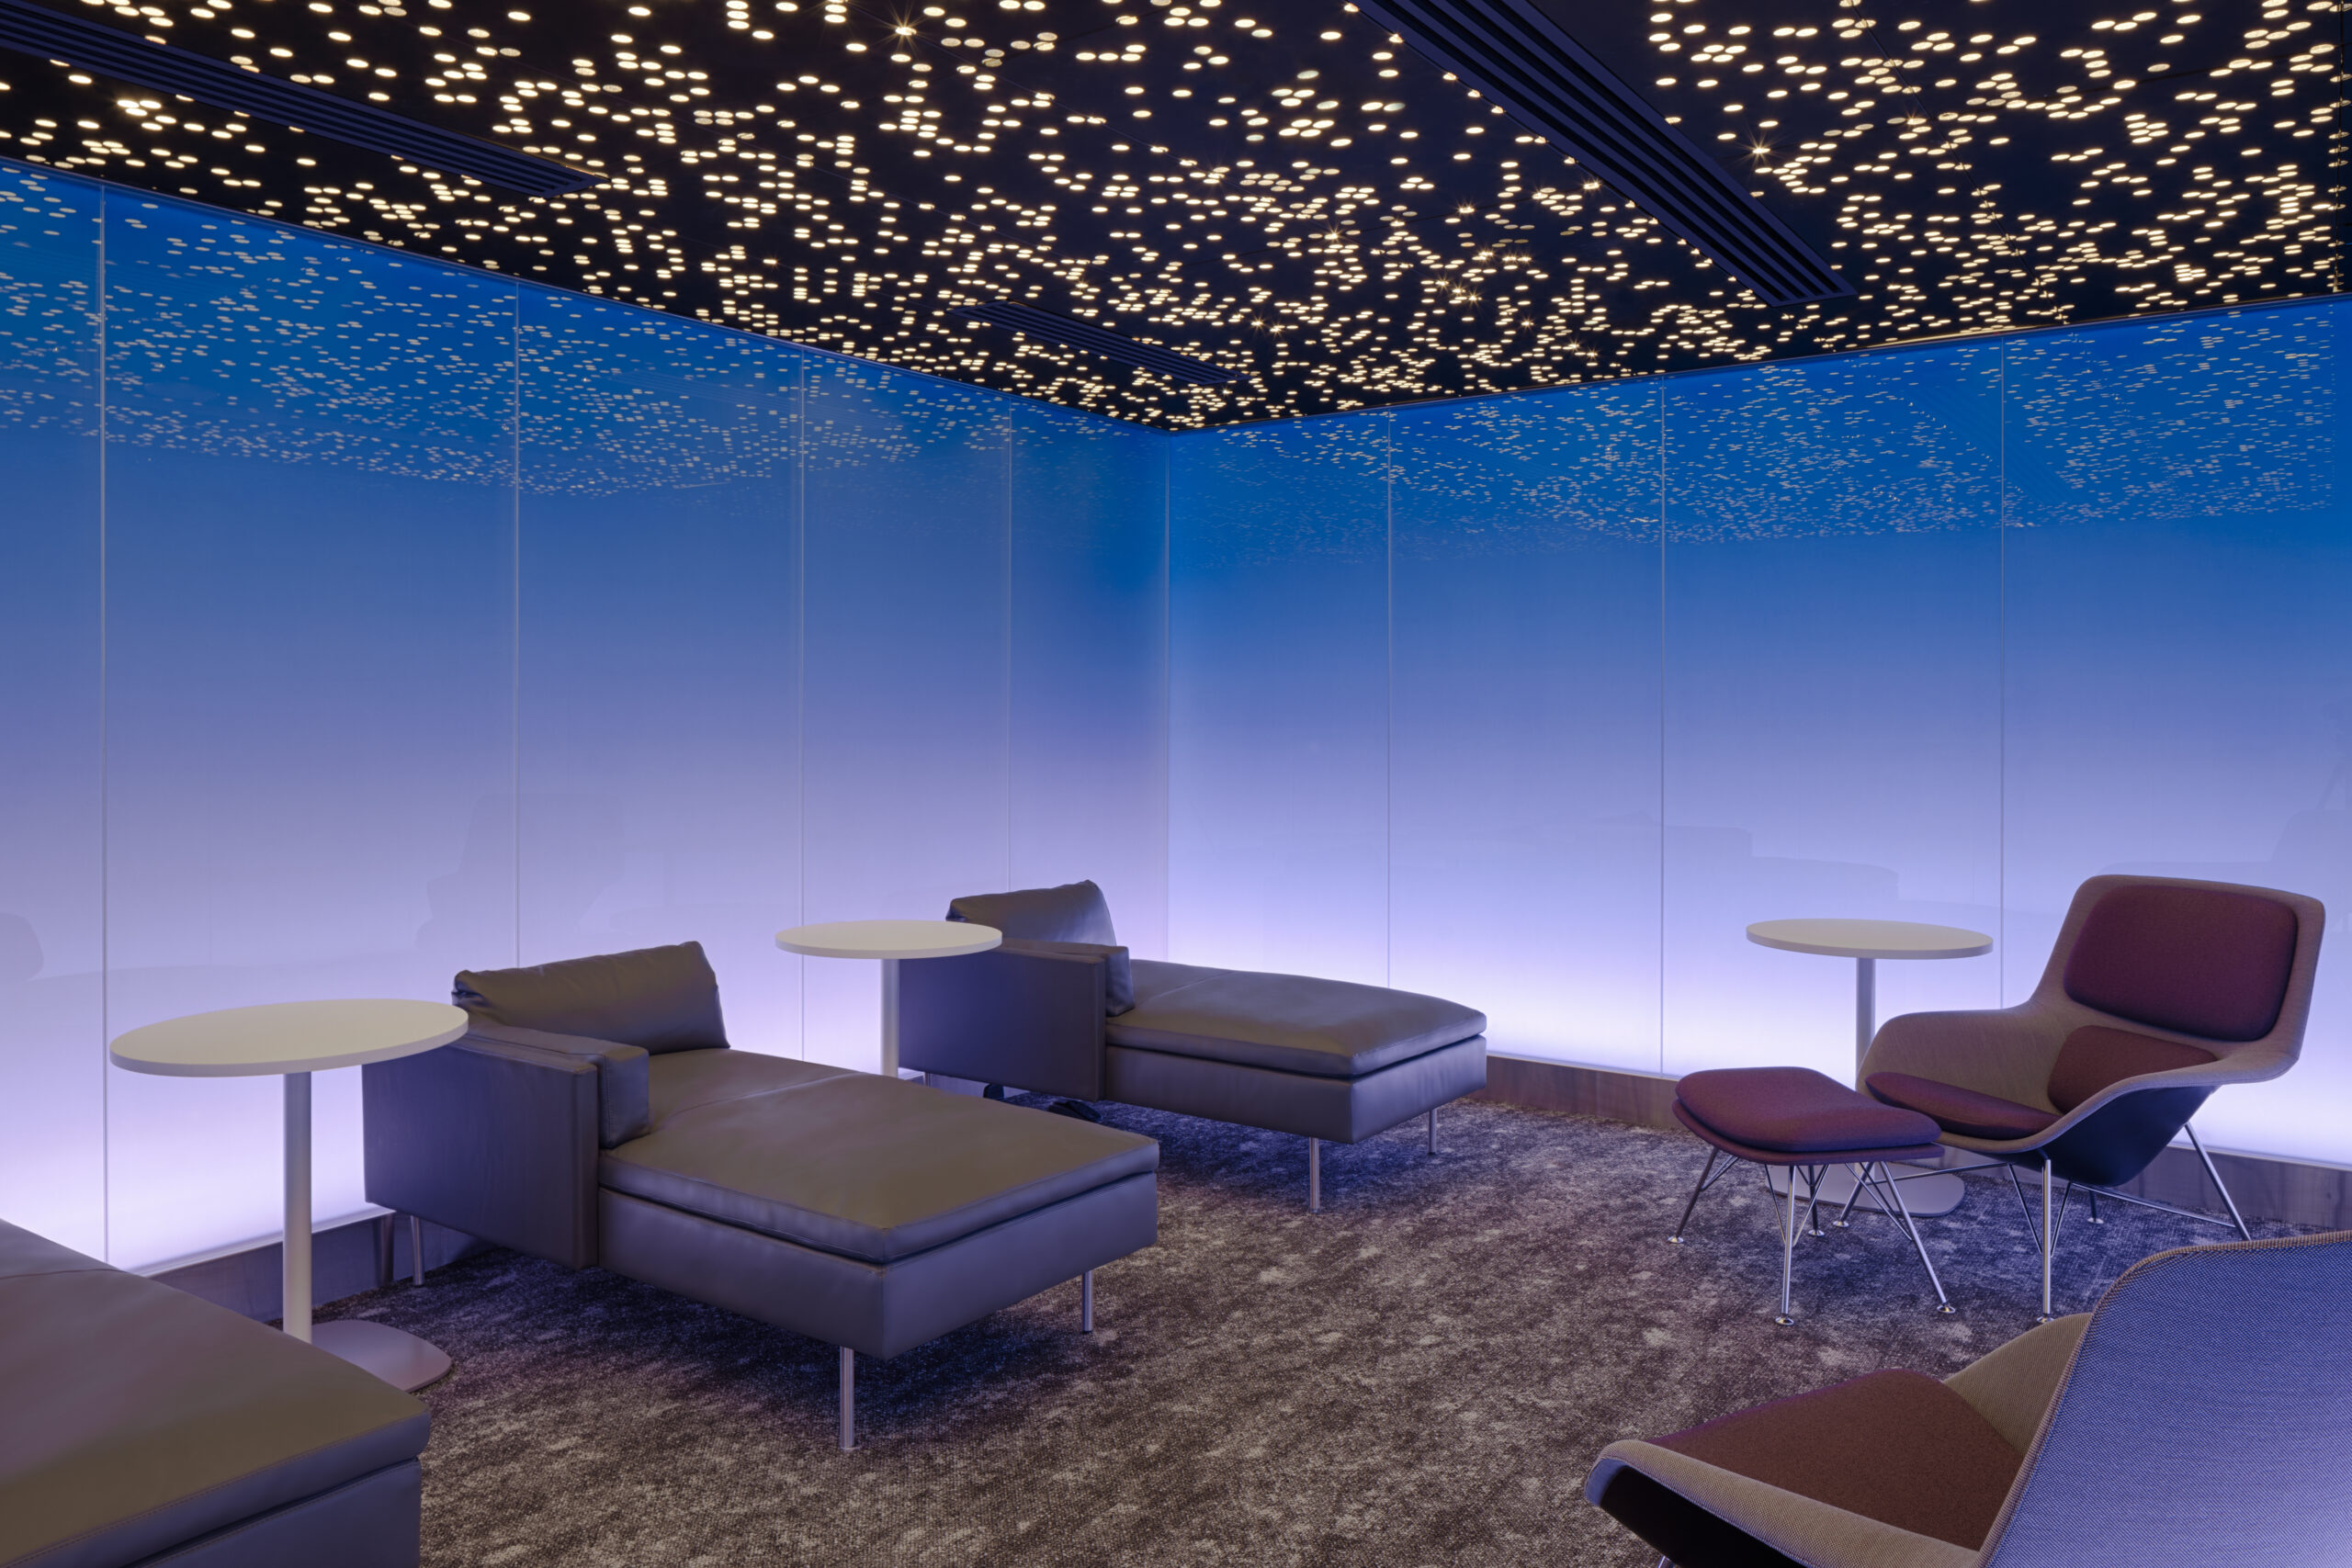 The Centurion Lounge - Relaxing Area and Spa Services